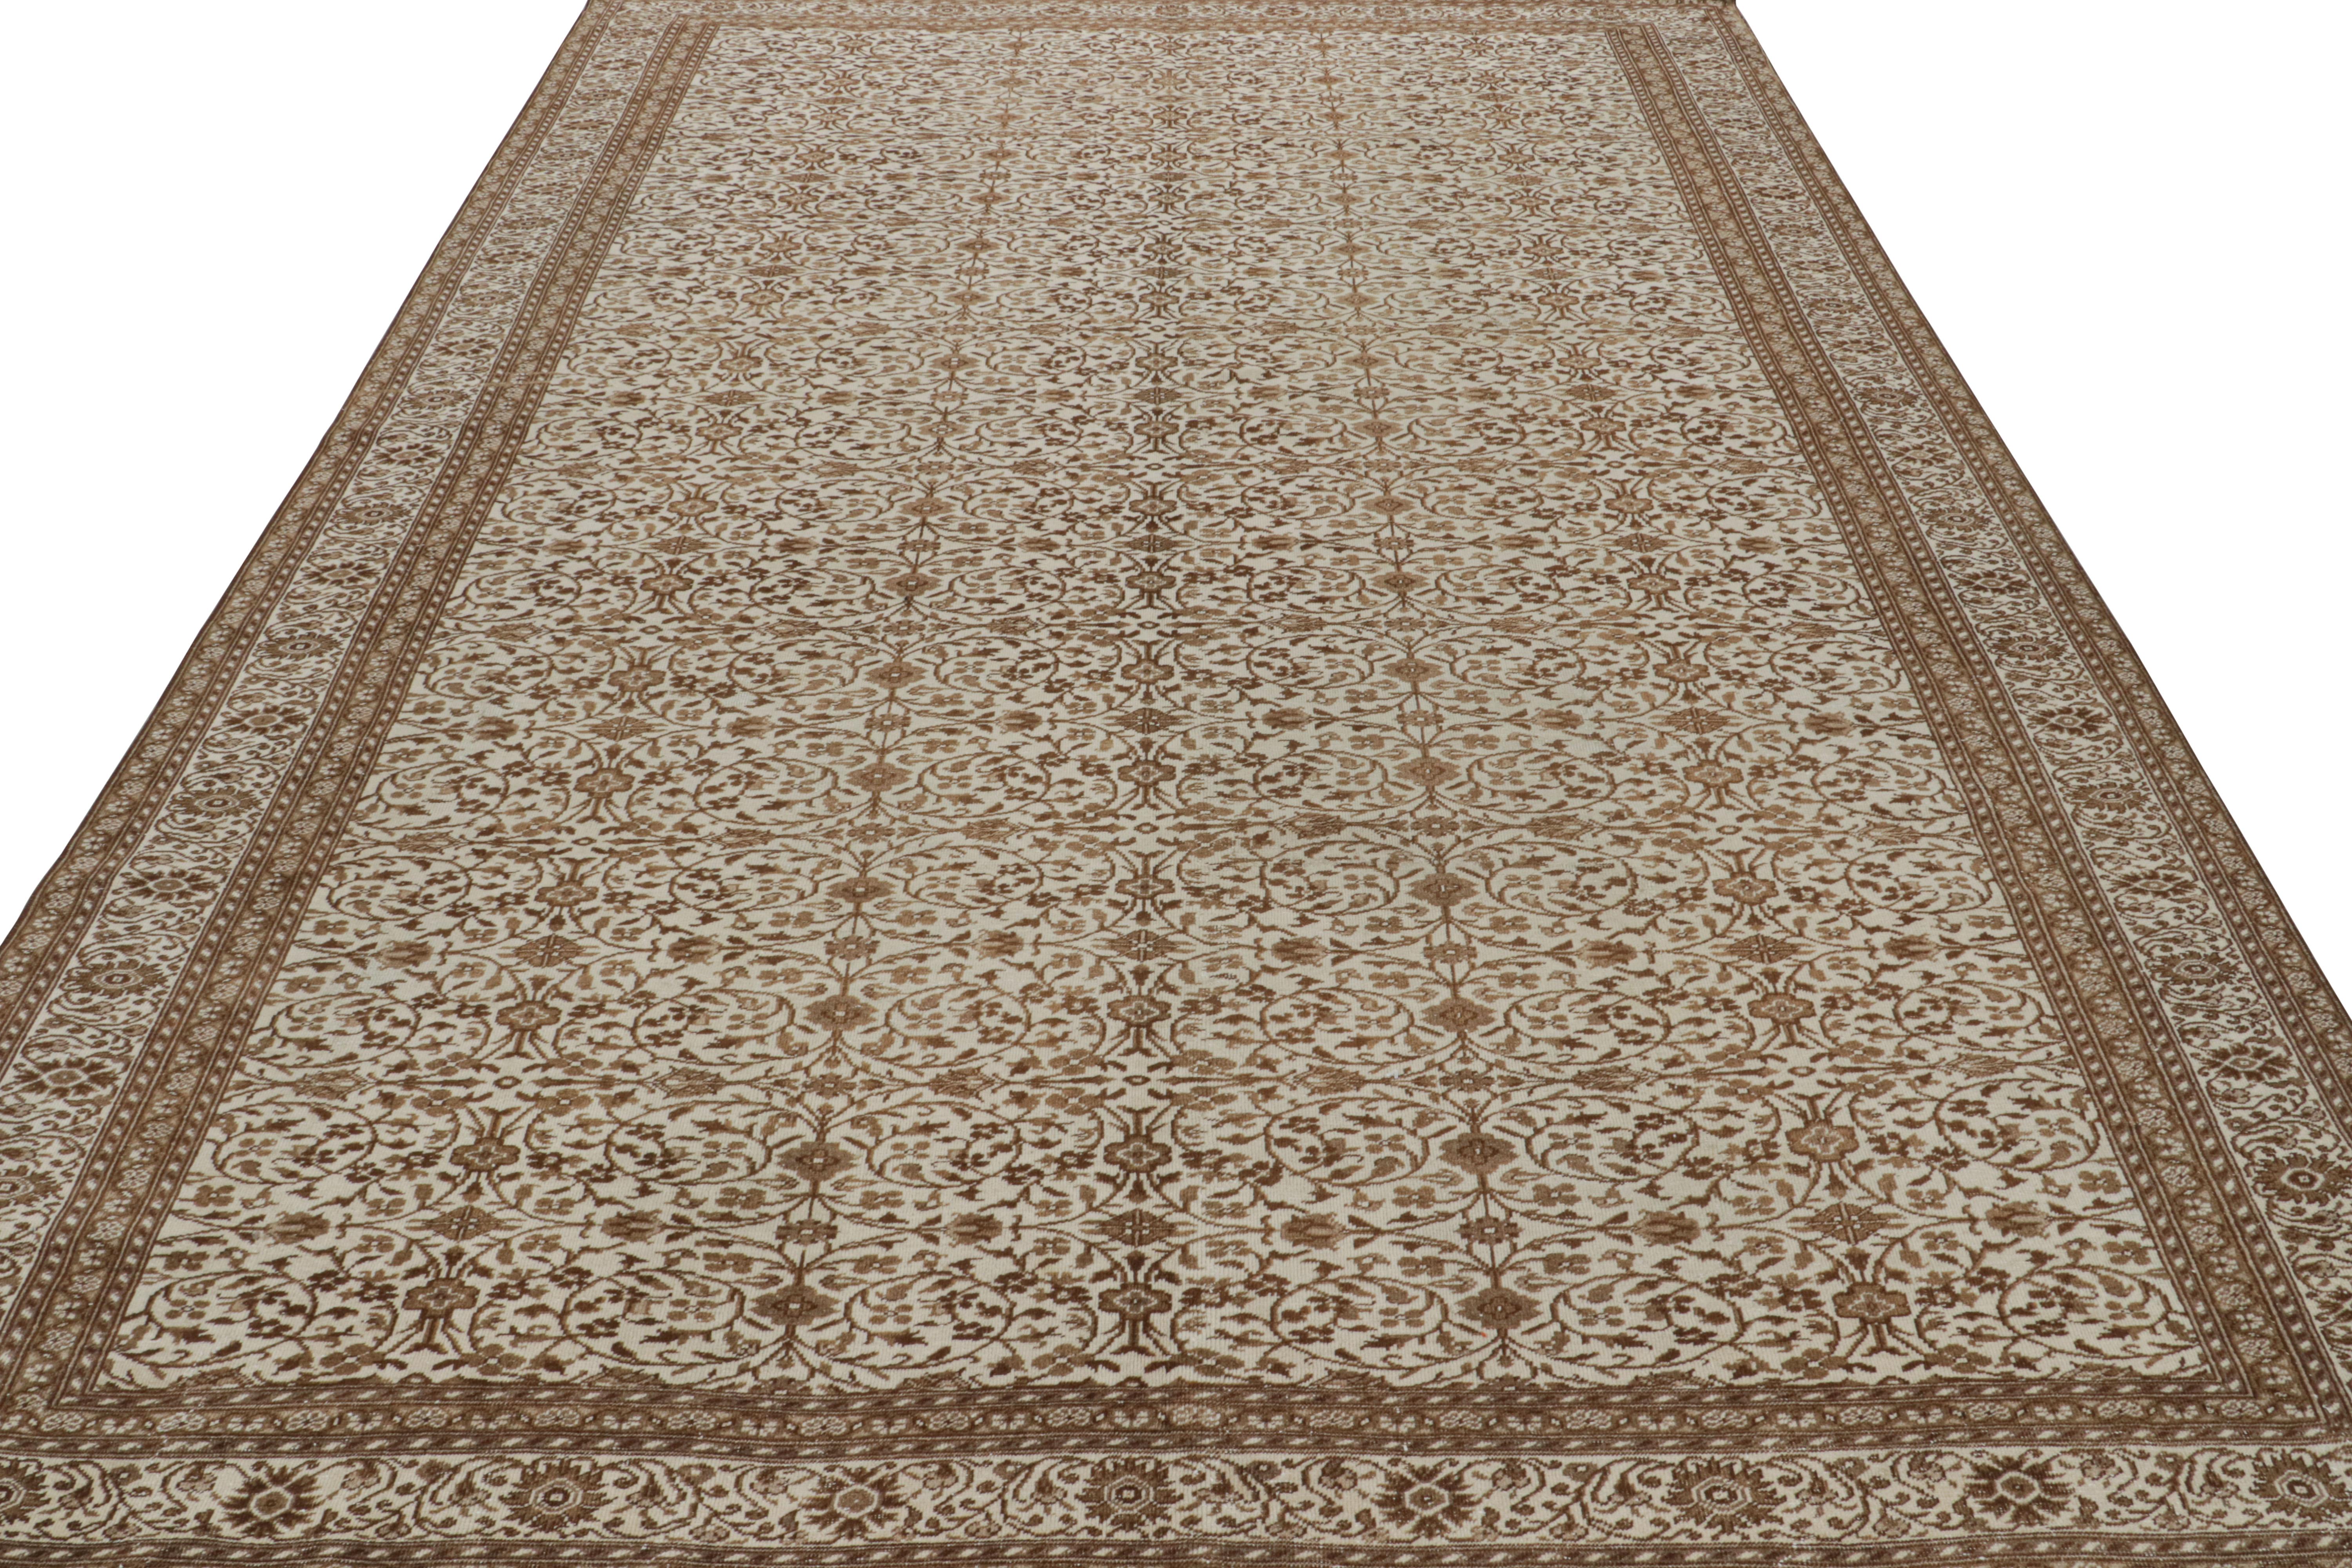 Turkish Vintage Sivas rug in Beige and Brown, with Herati Patterns, from Rug and Kilim For Sale